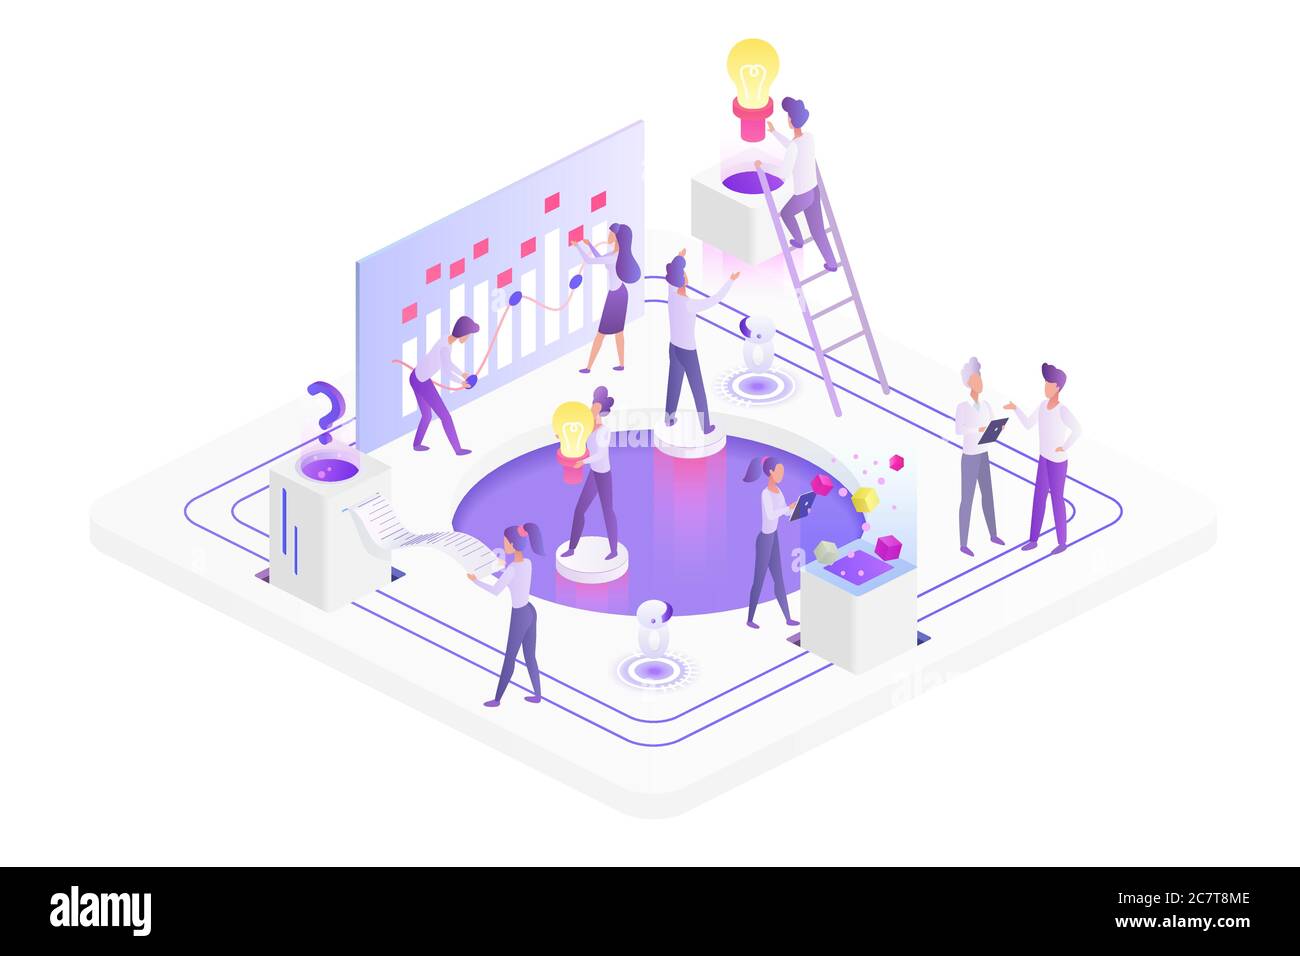 Team working isometric vector illustration. Building new company together. Corporate unity. Business management. Collaboration and partnership. Online startup cartoon conceptual design element Stock Vector